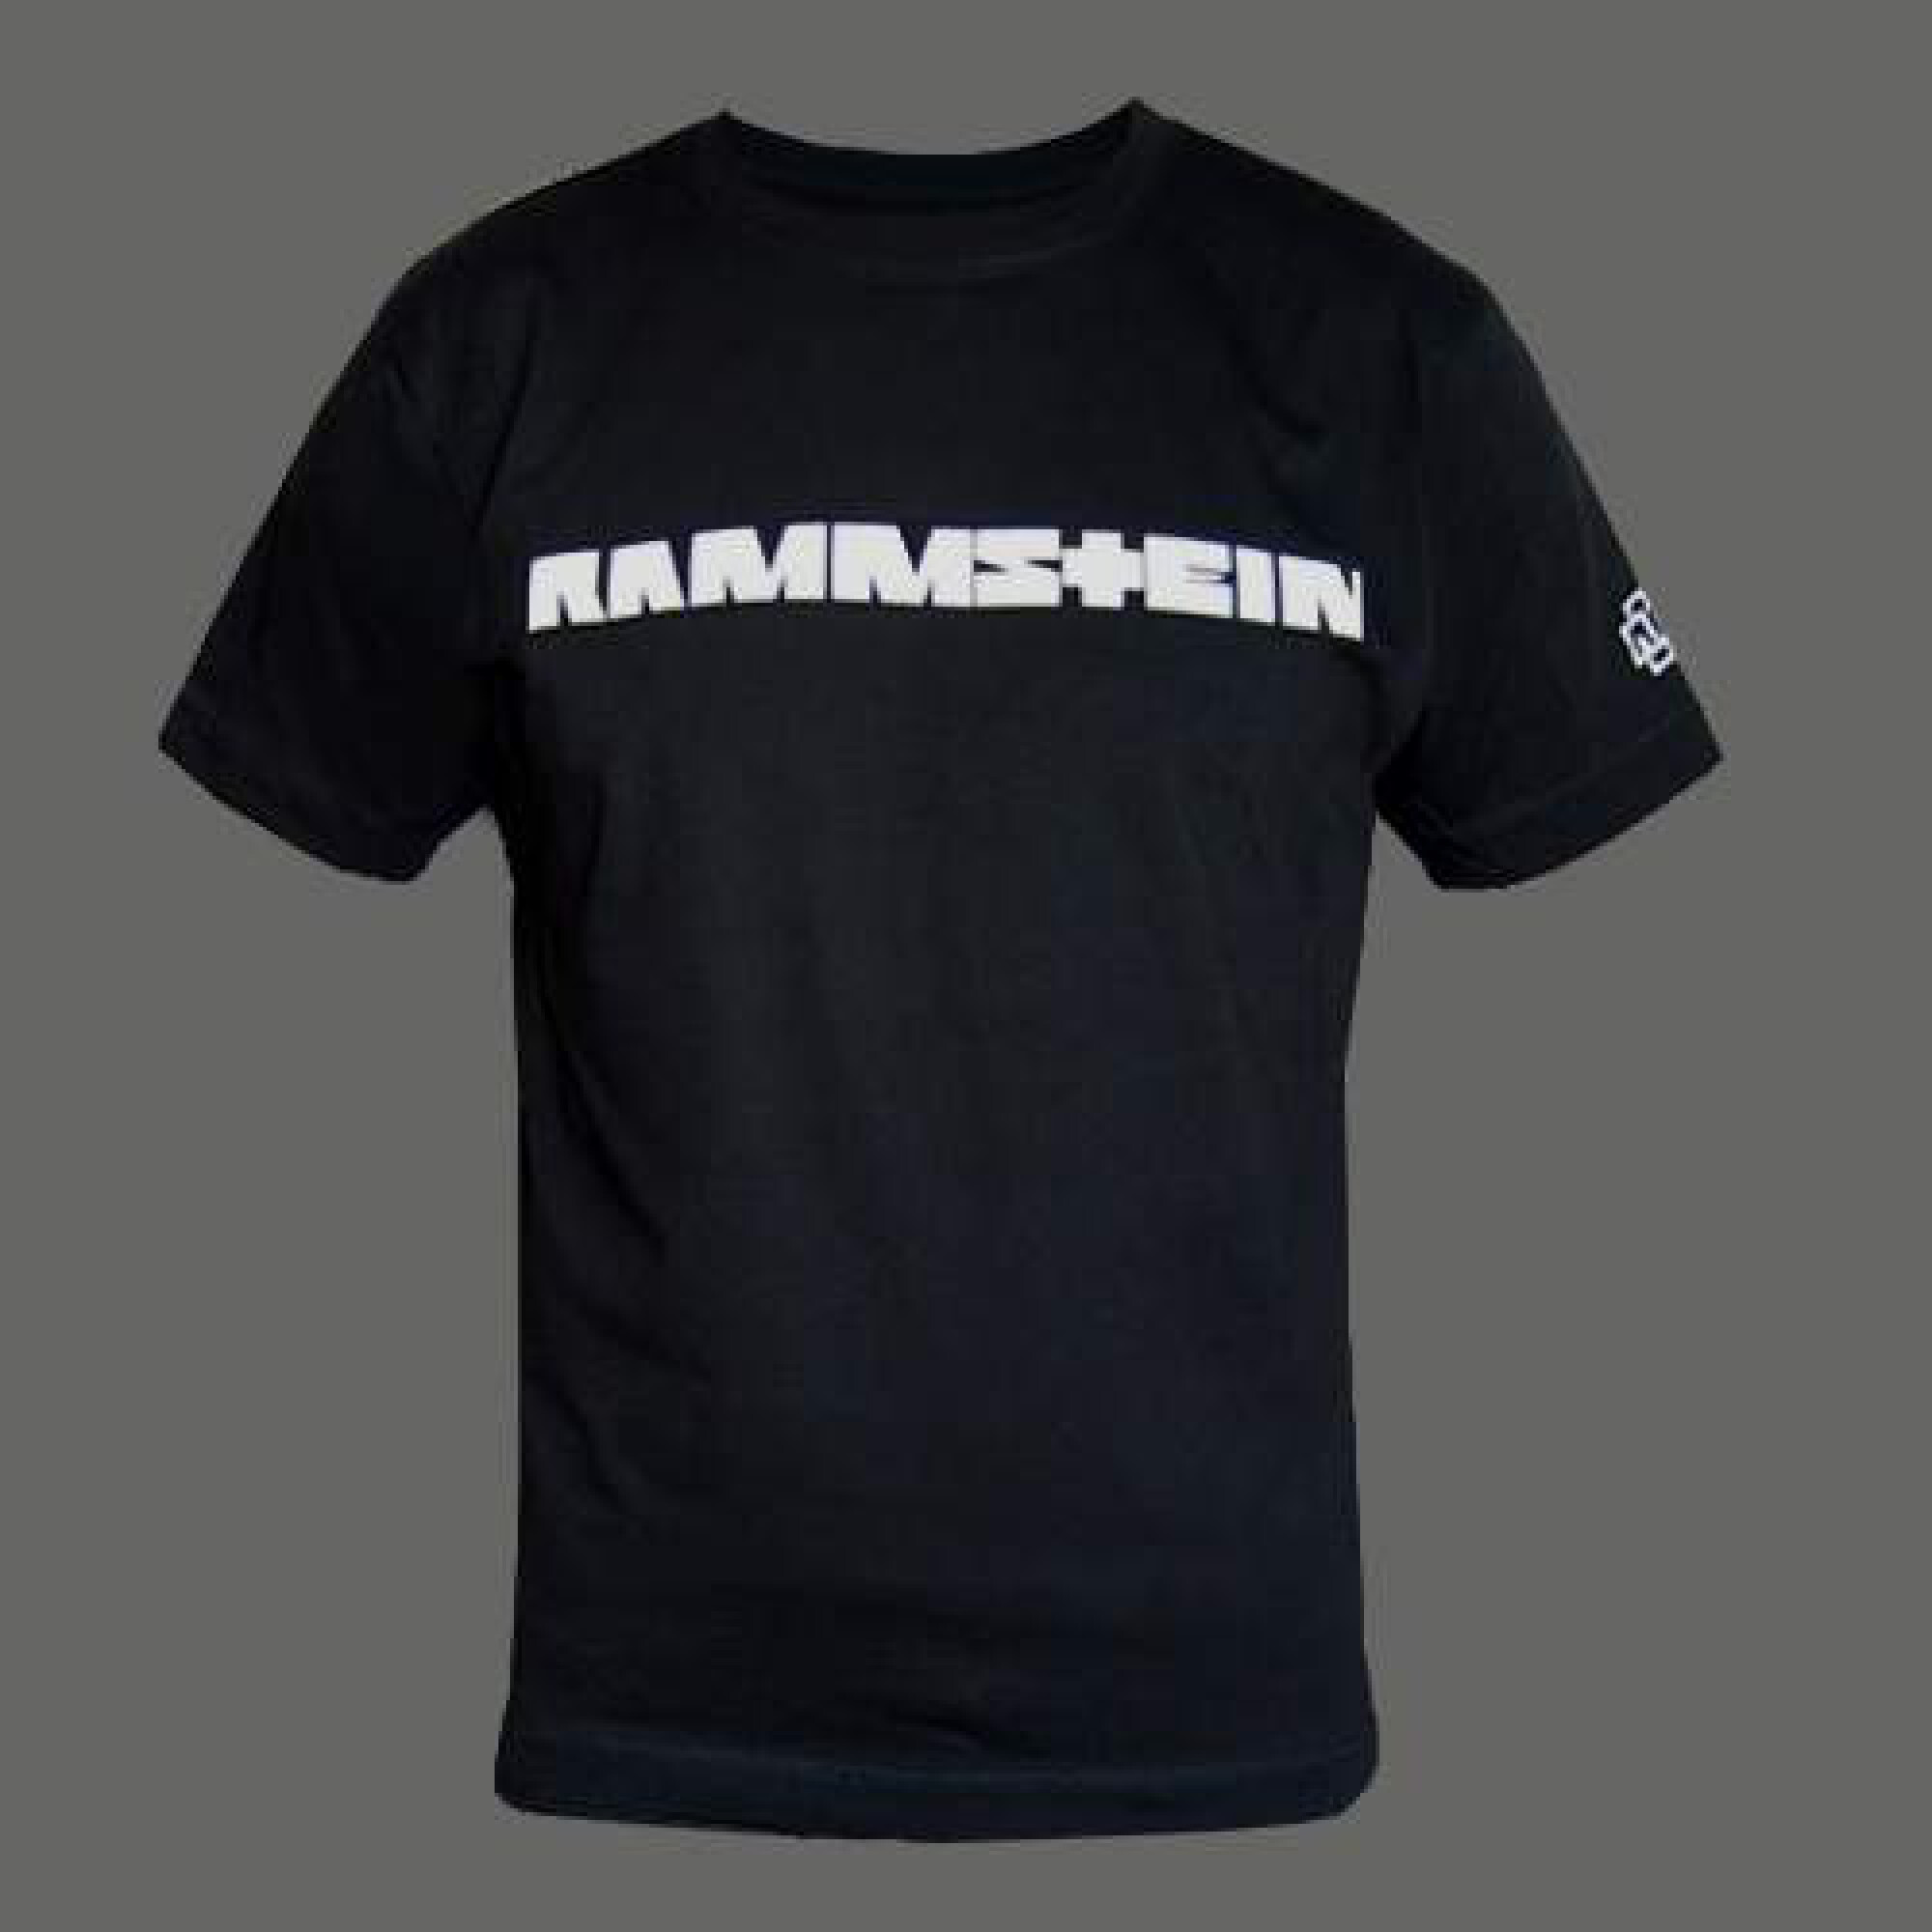 Rammstein Shop - All You Need to Know BEFORE You Go (with Photos)